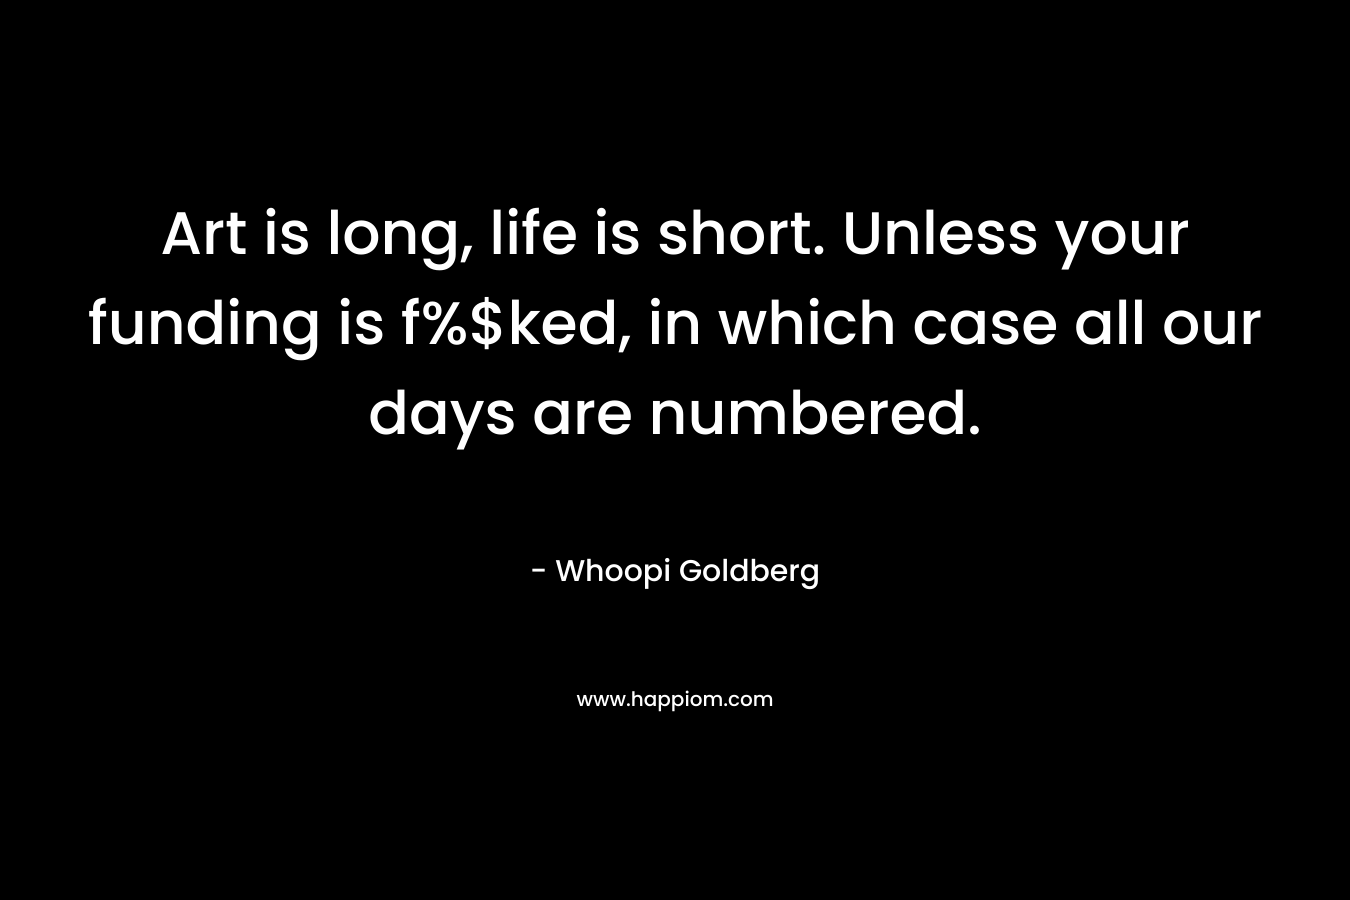 Art is long, life is short. Unless your funding is f%$ked, in which case all our days are numbered. – Whoopi Goldberg